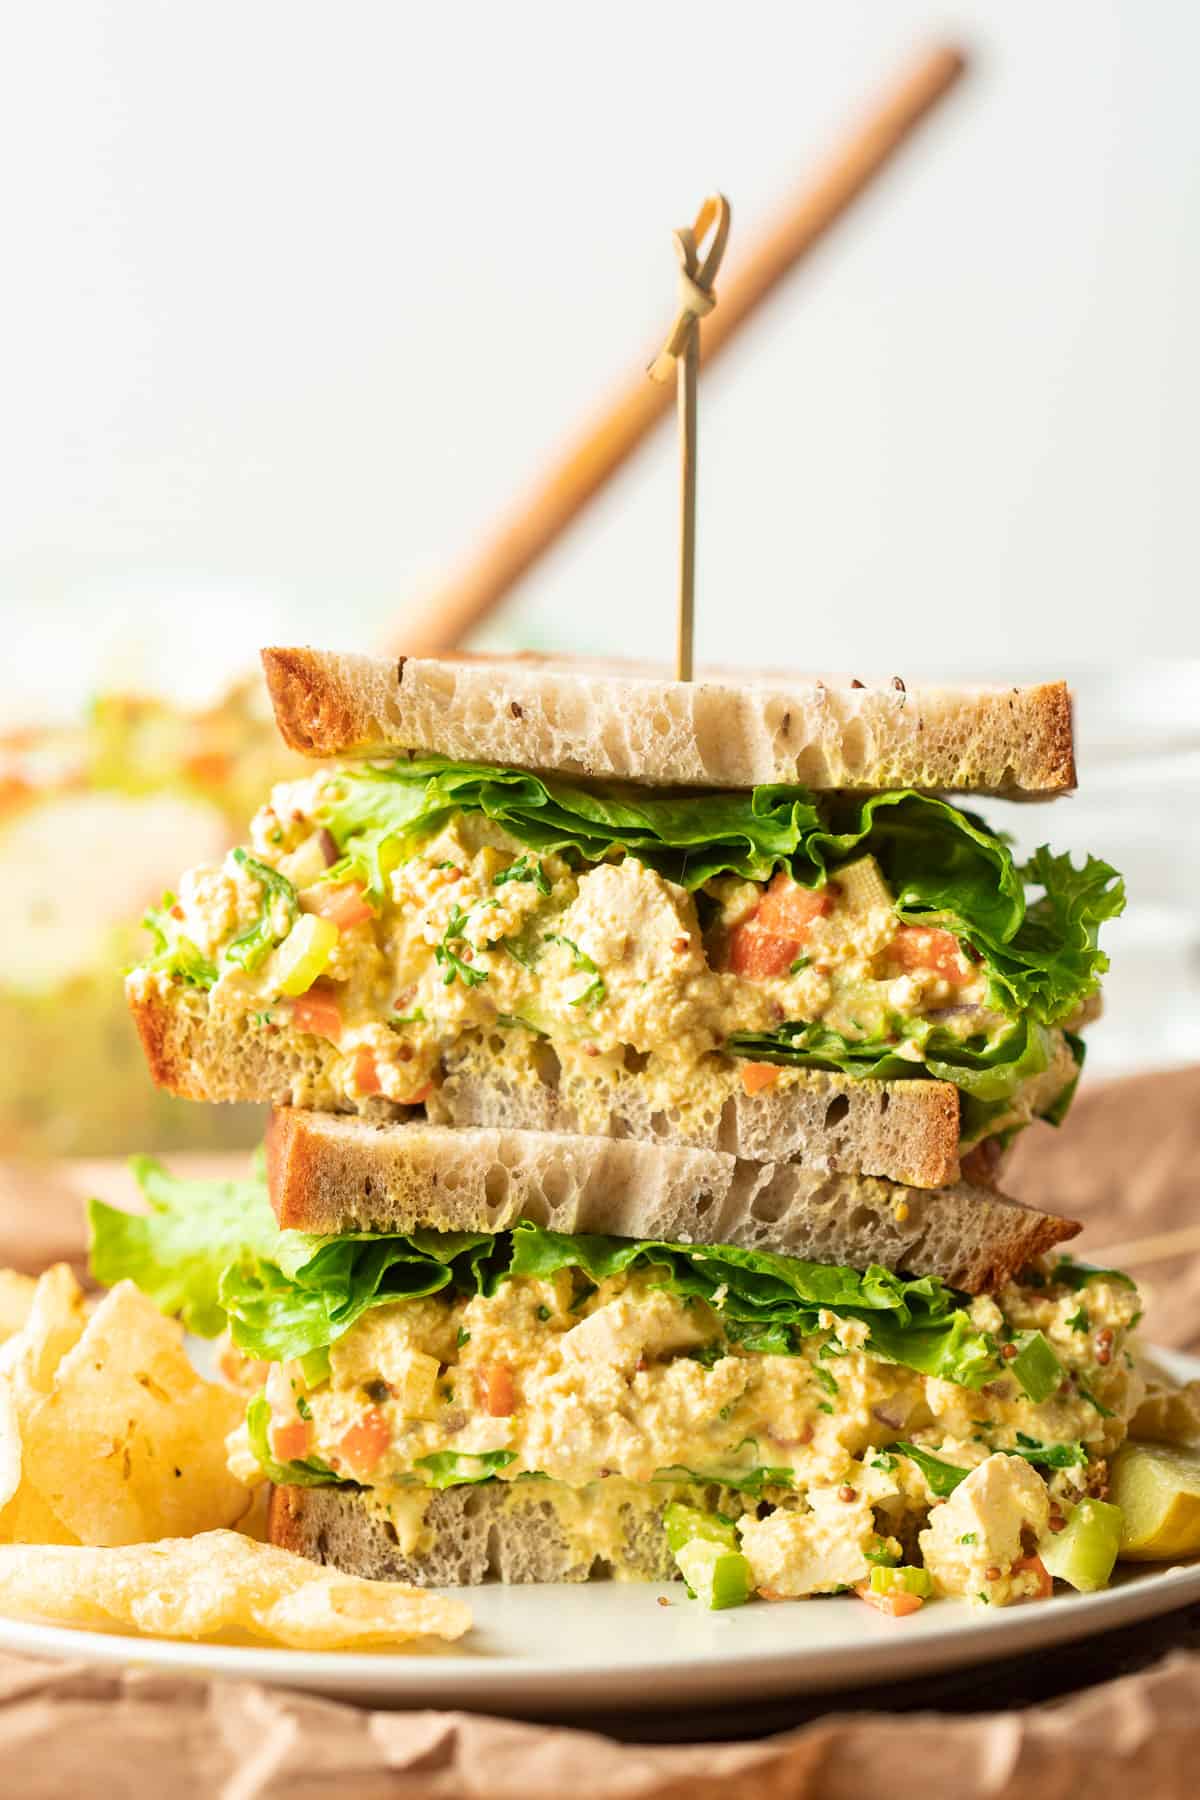 Two halves of a Vegan Egg Salad sandwich stacked on a plate.